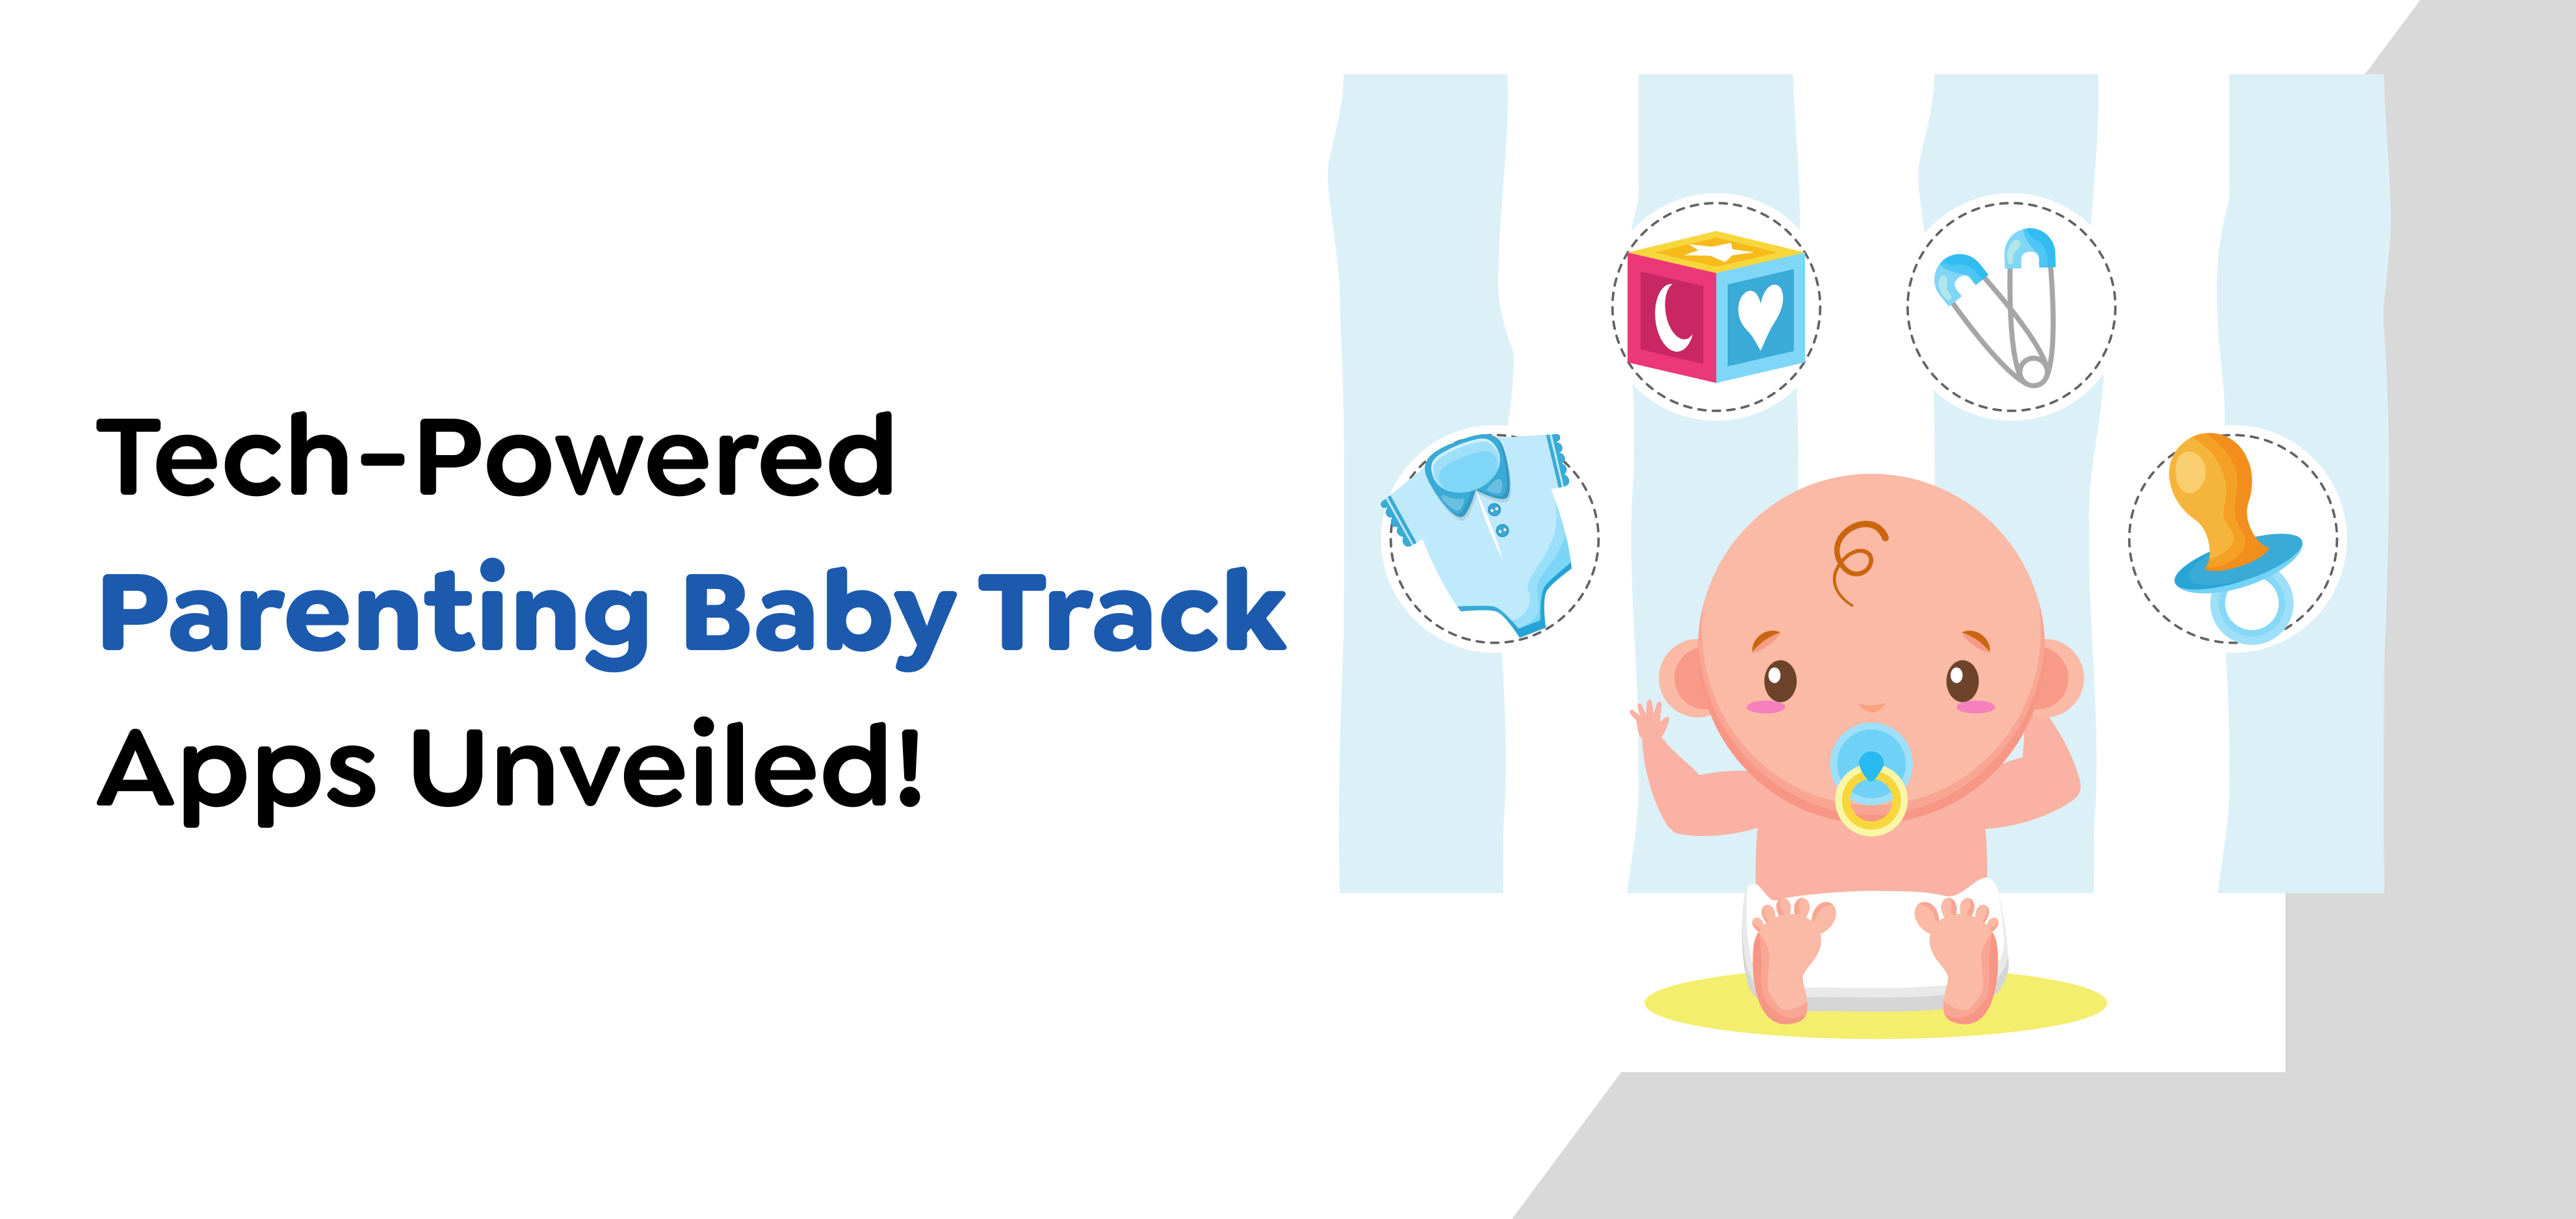 Baby Tracker Apps